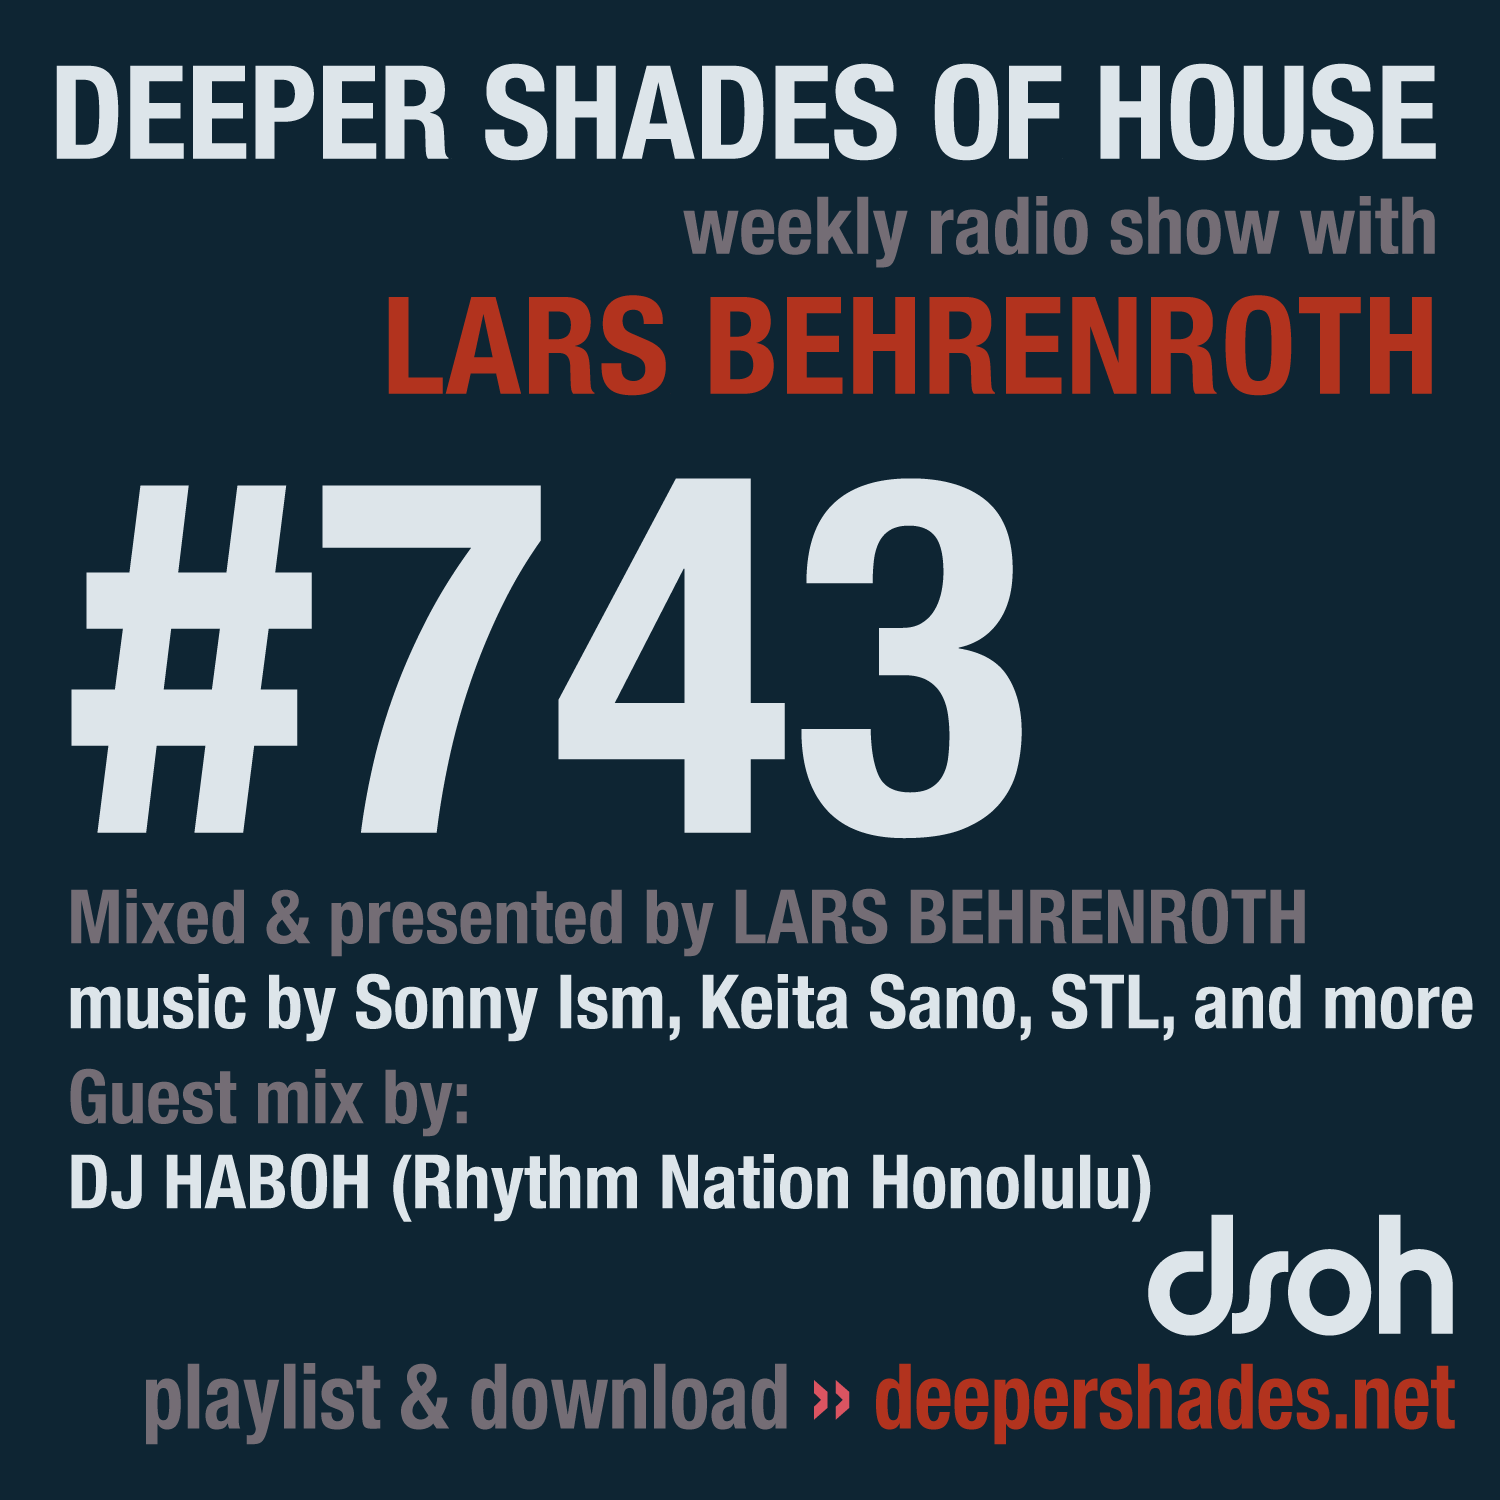 Deeper Shades Of House 742